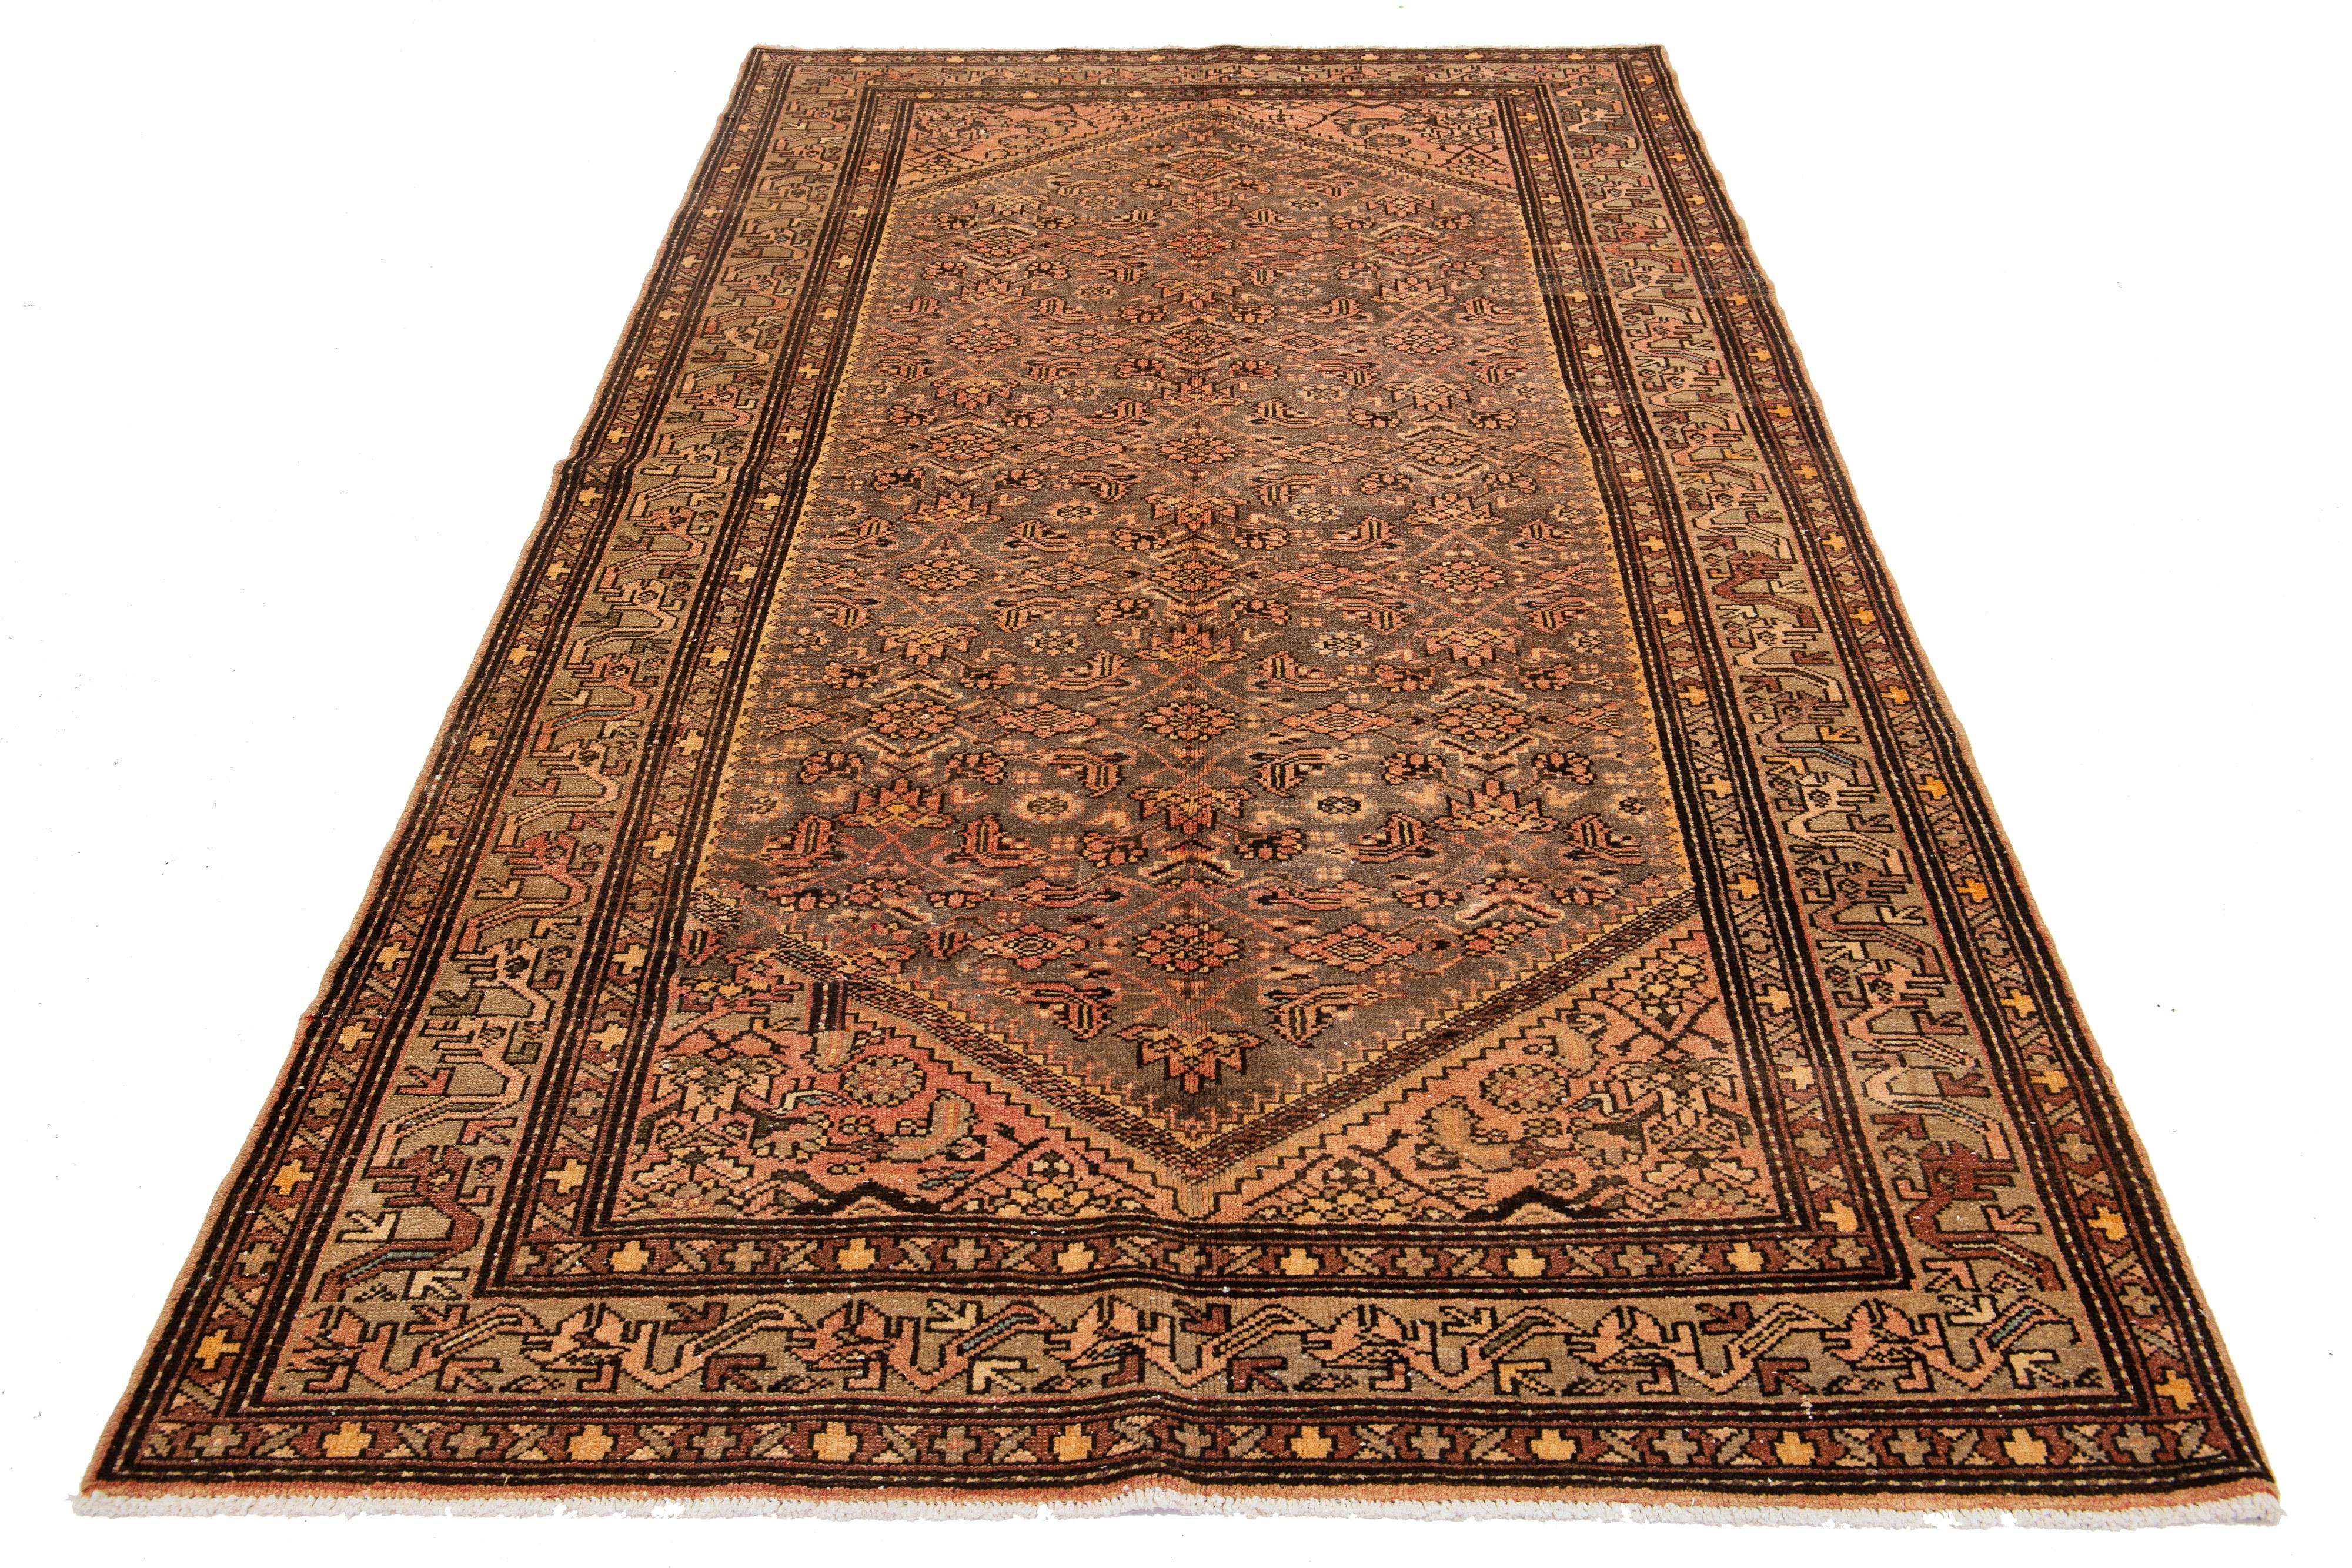 This exceptional antique Persian Malayer rug is crafted from hand-knotted wool. The design features a beautiful combination of gray and rust as the base, enhanced with blue, orange, and brown highlights in a stunning and intricately detailed